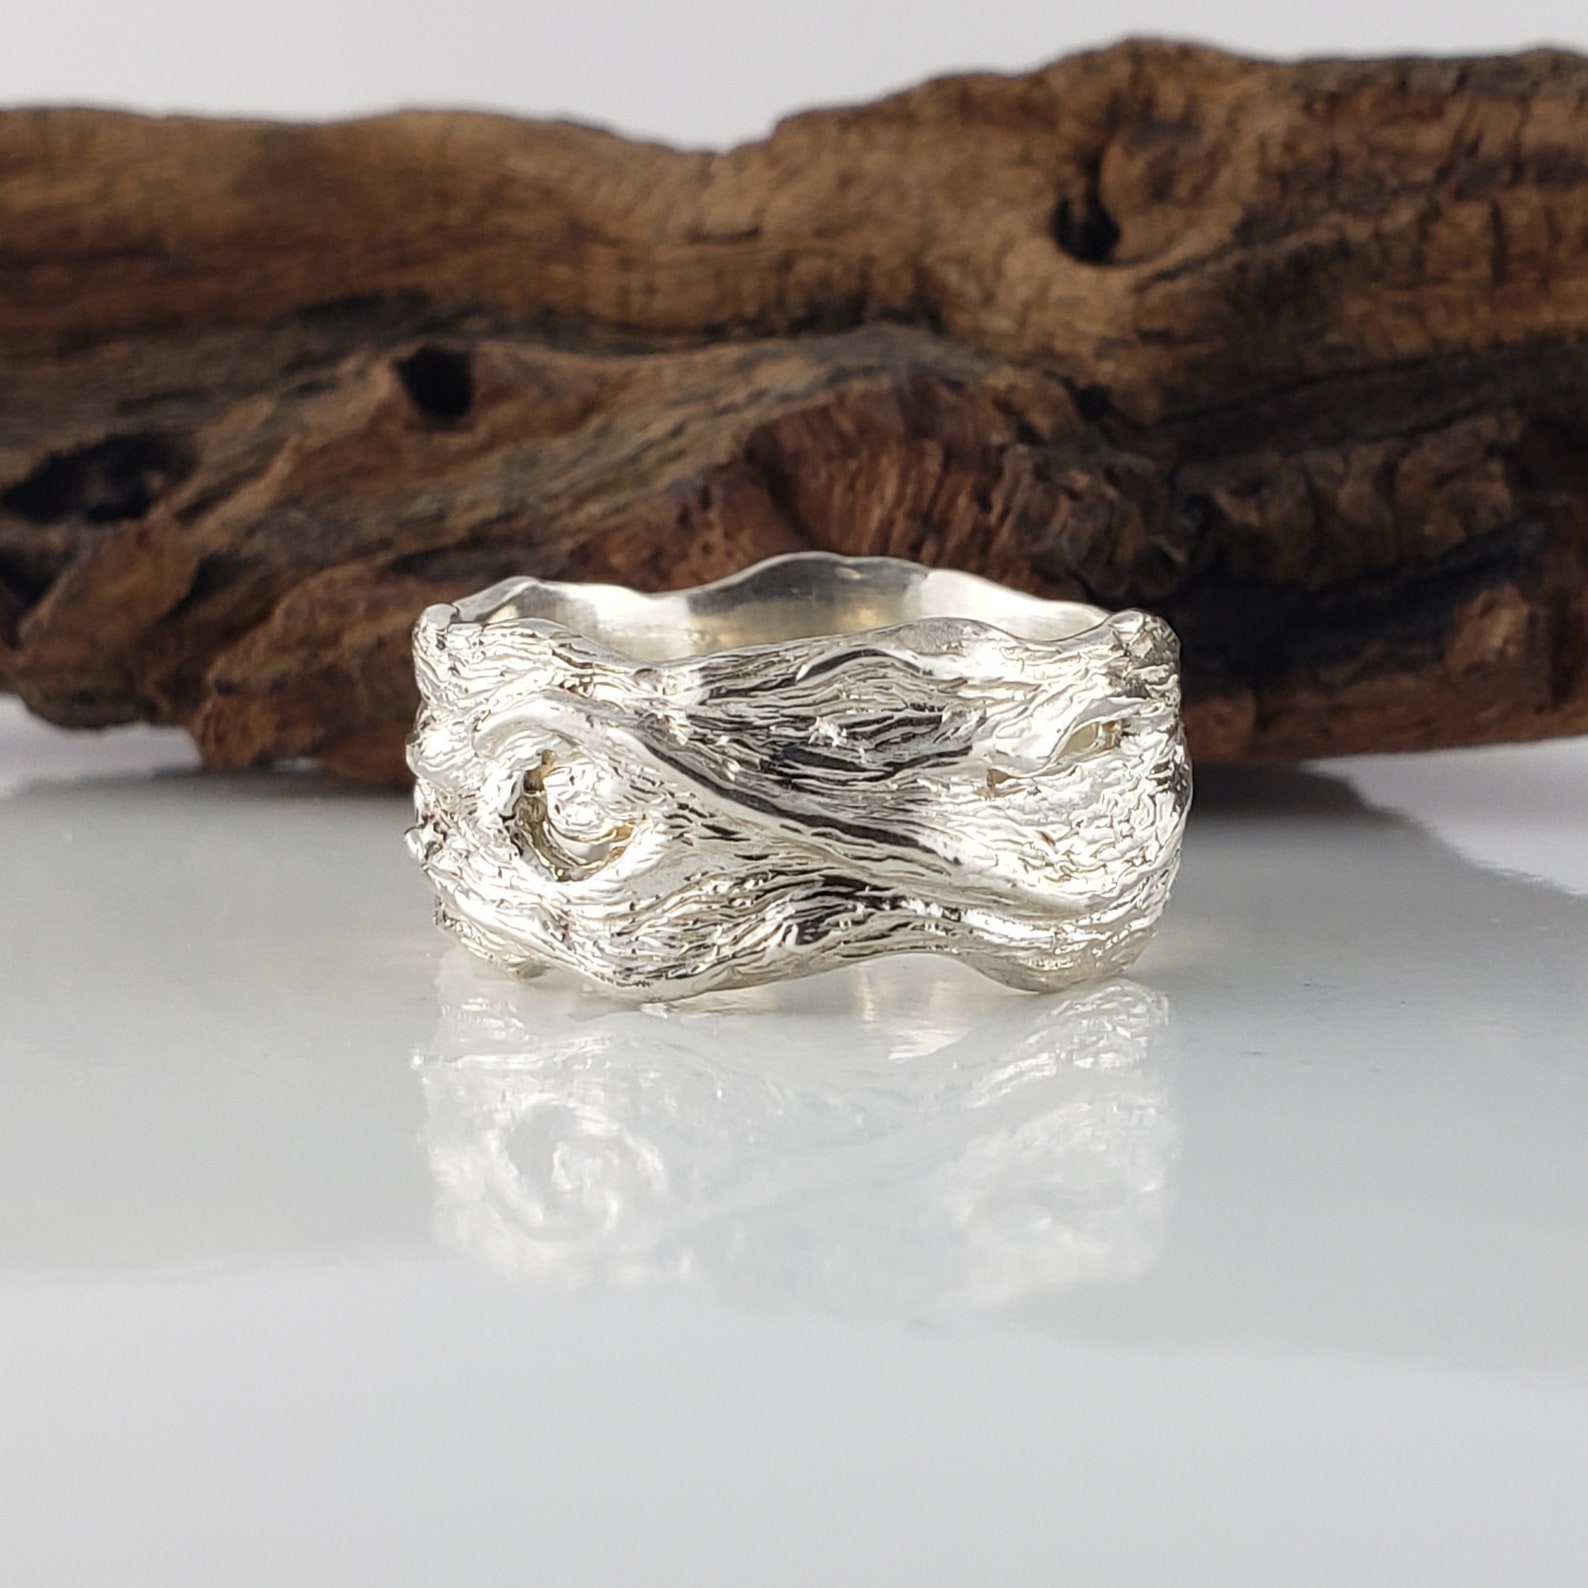 Driftwood Inspired Wedding Band in Solid Gold Engagement Ring | Etsy